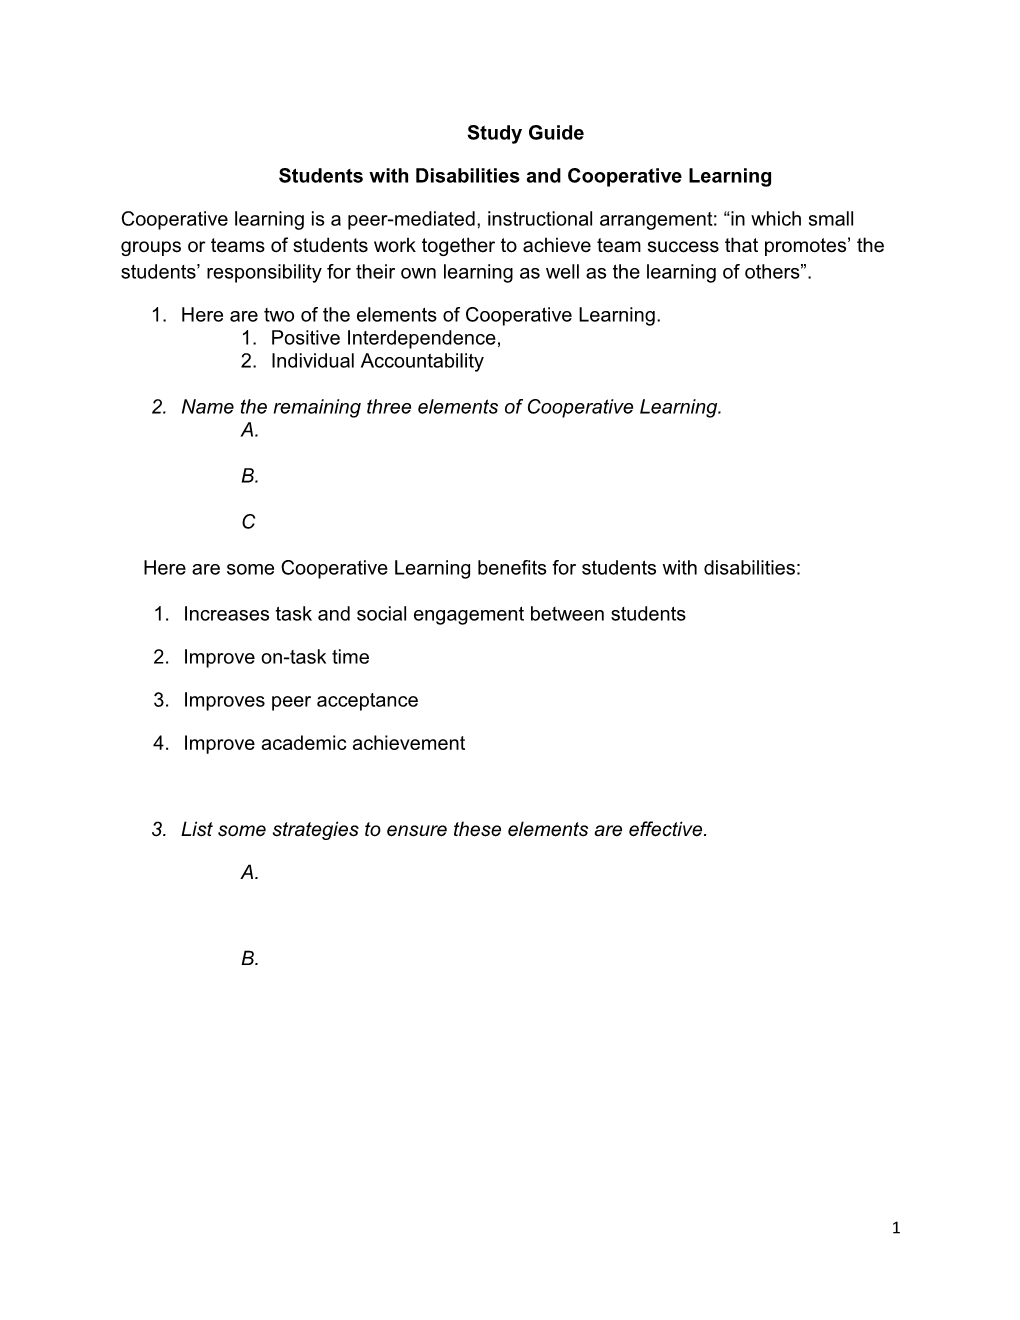 Students with Disabilities and Cooperative Learning